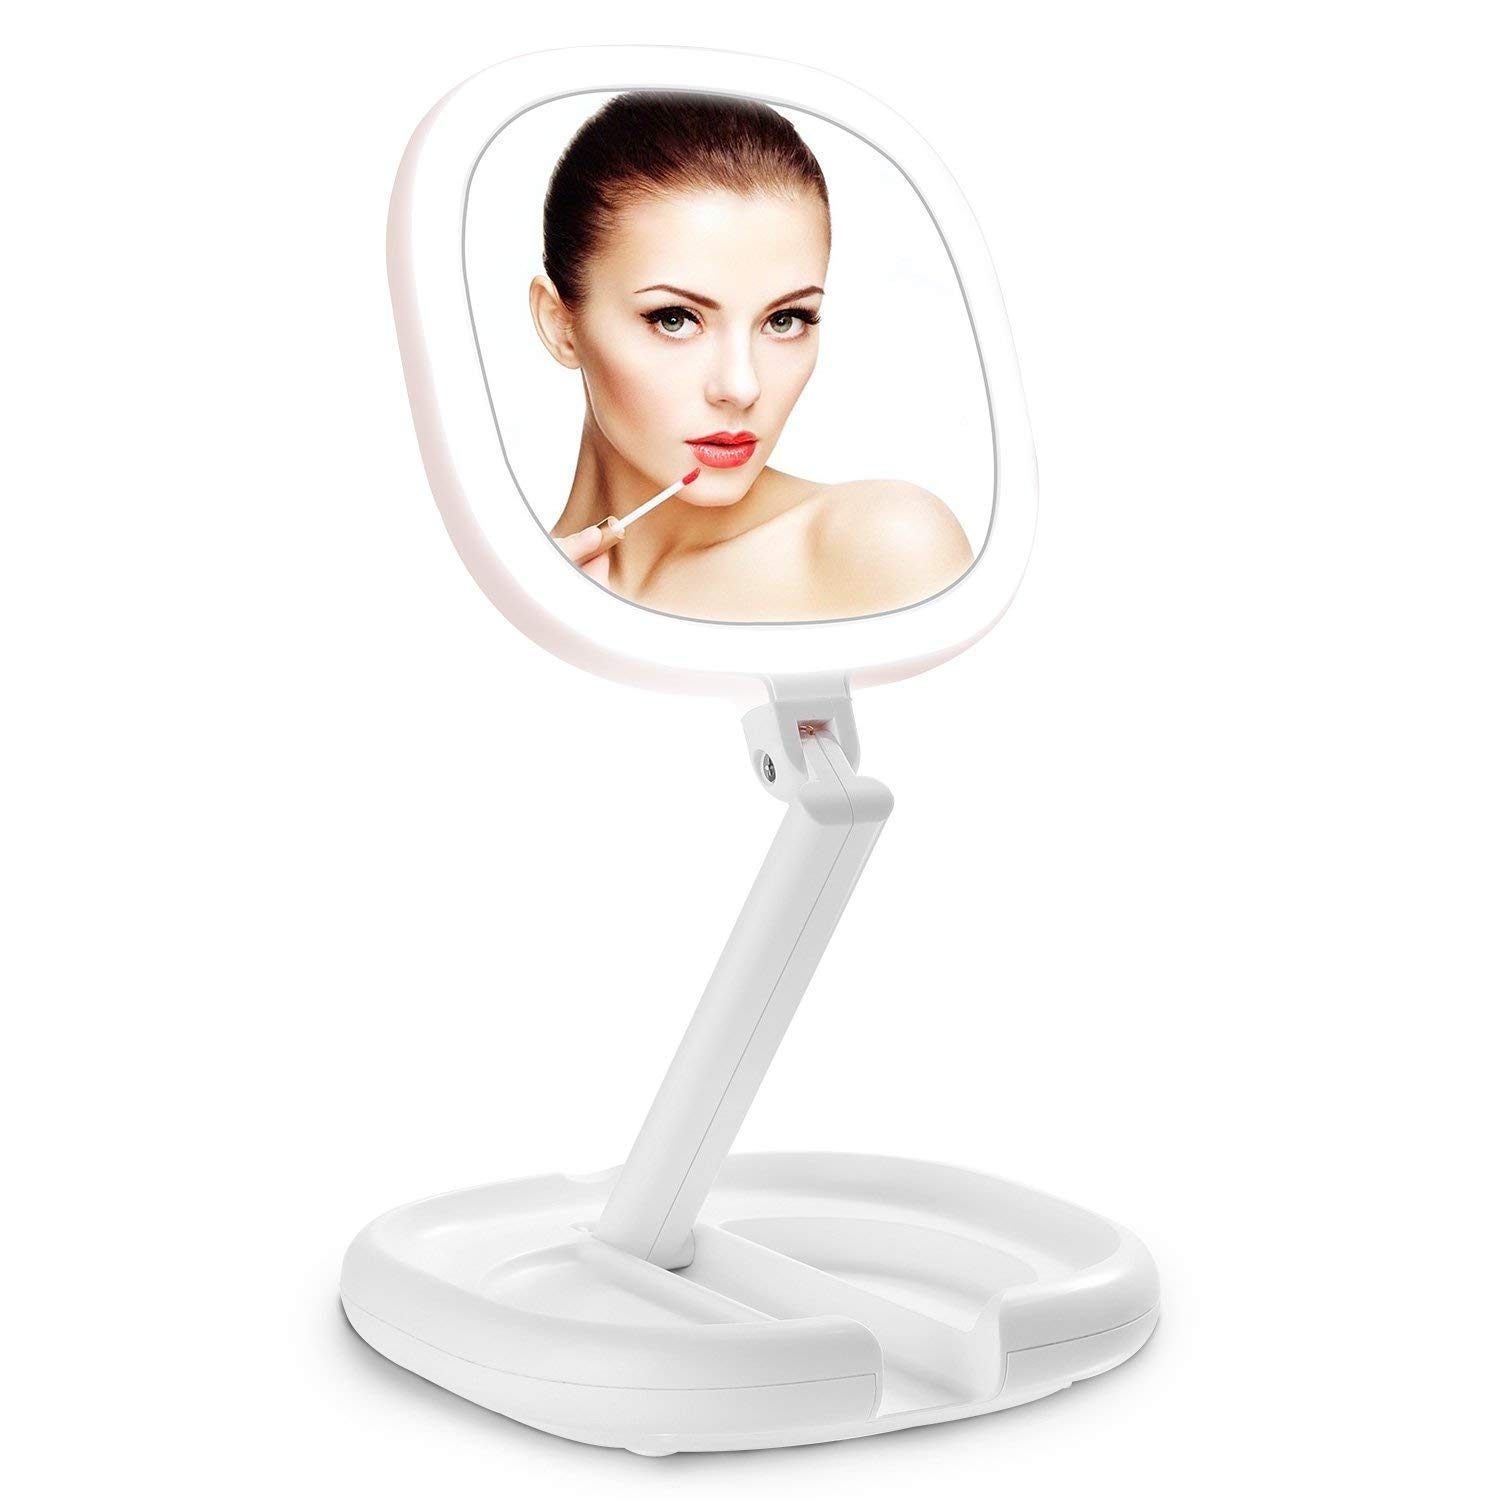 Lighted Makeup Mirror, Beautifive Double Sided Magnifying Mirror, Vanity Mirror with Lights, Smart Design with Brightness&Angle&Height Adjustability, Folding Compact Mirror, LED Mirror for Travel